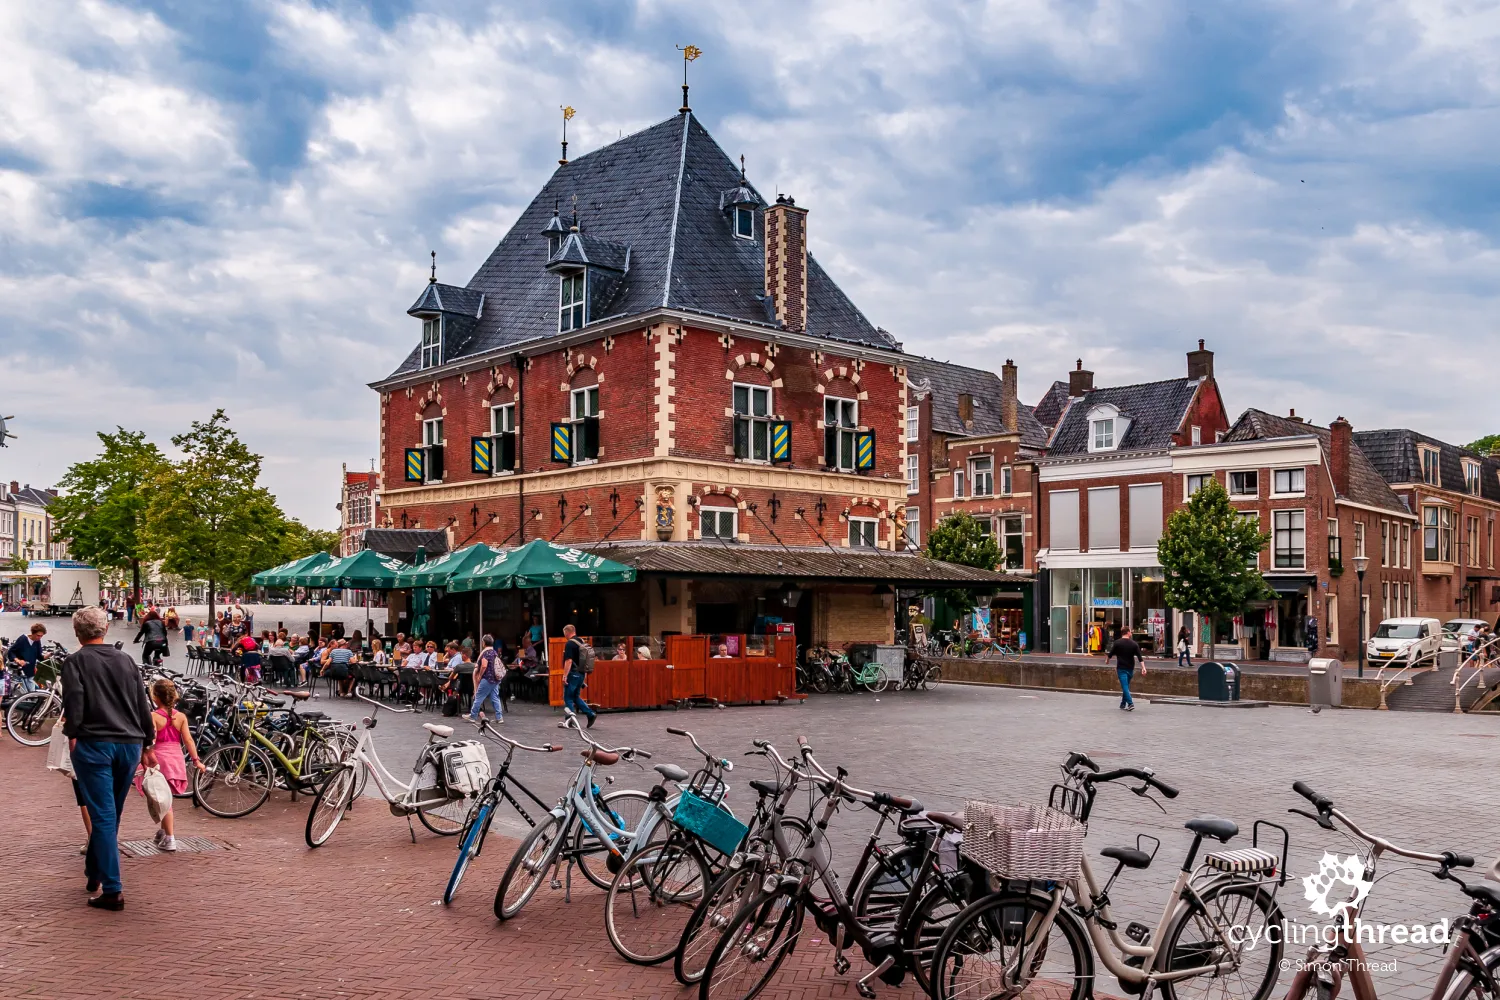 The historic city weigh house in Leeuwarden